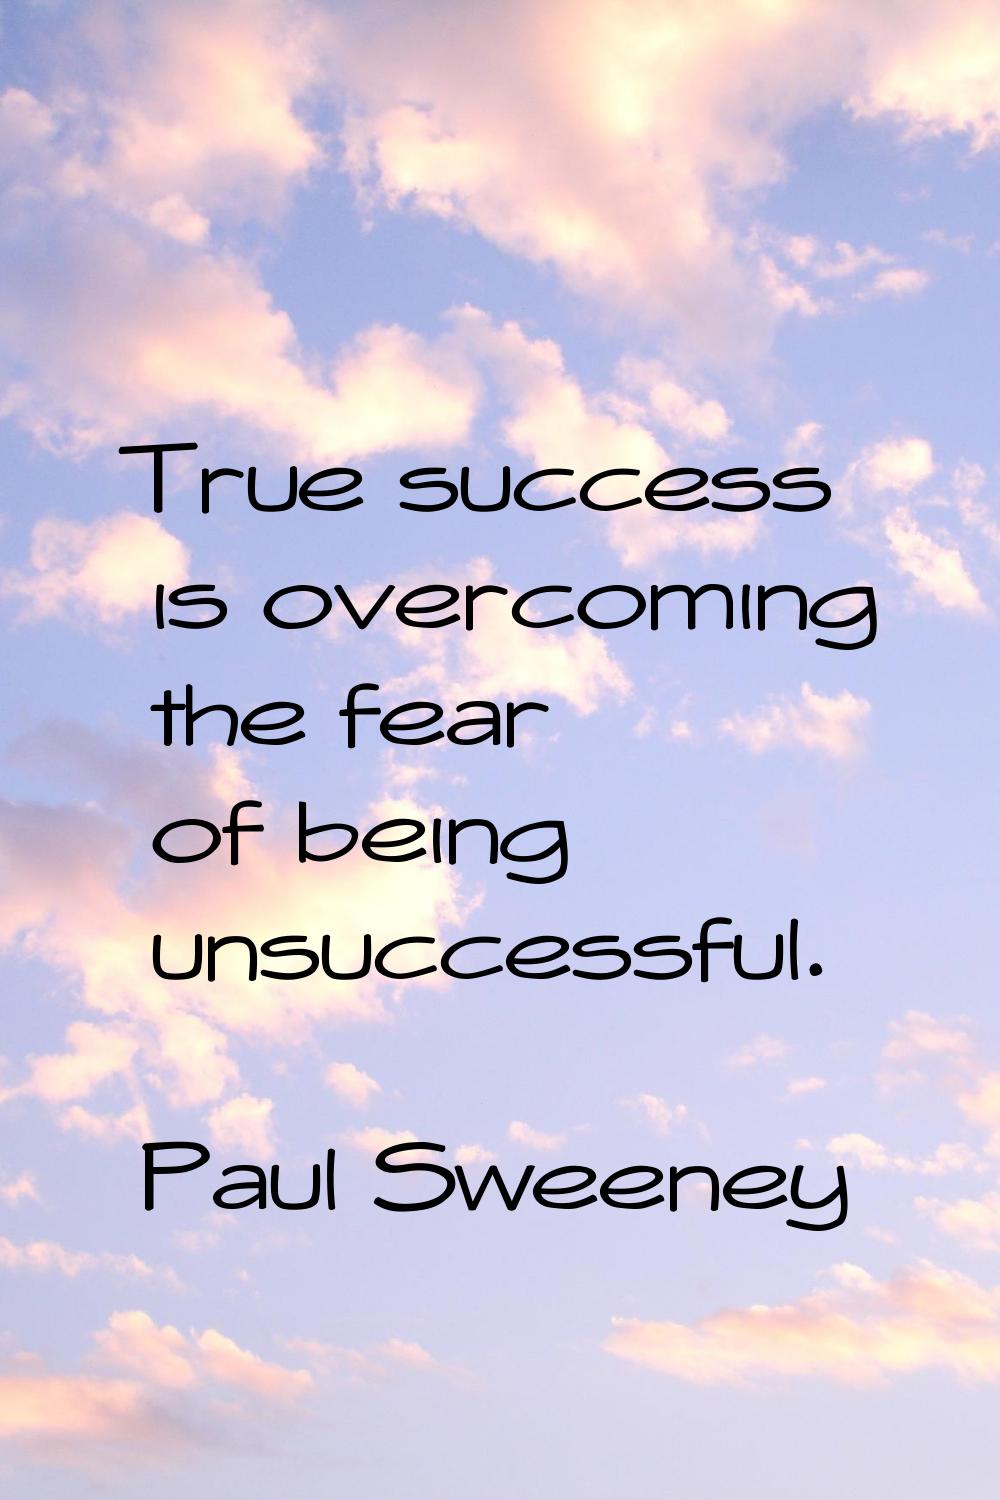 True success is overcoming the fear of being unsuccessful.